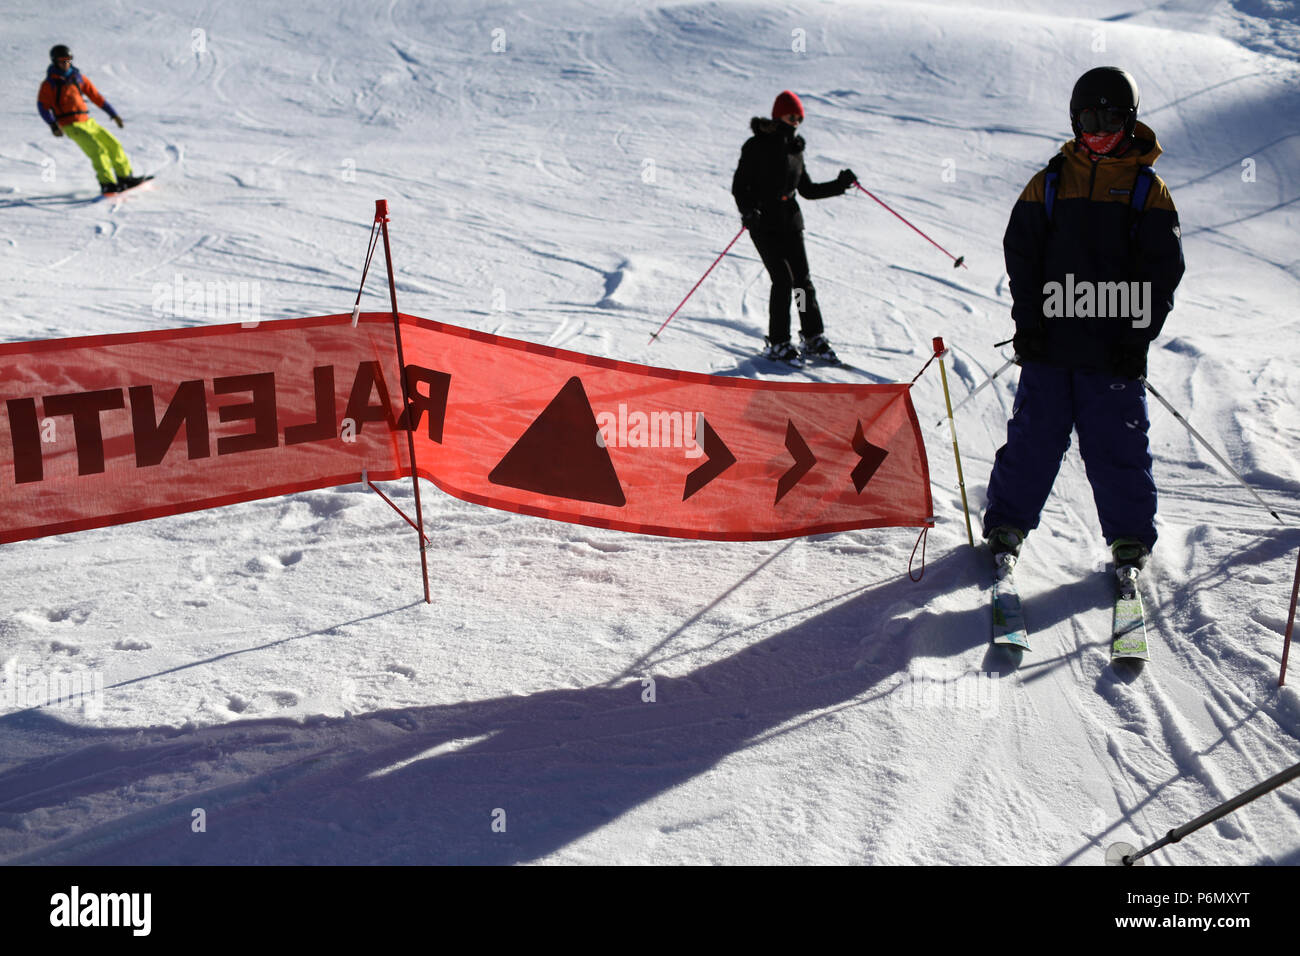 French Alps. Skiers slow sign. Ski Slope.  Saint-Gervais. France. Stock Photo